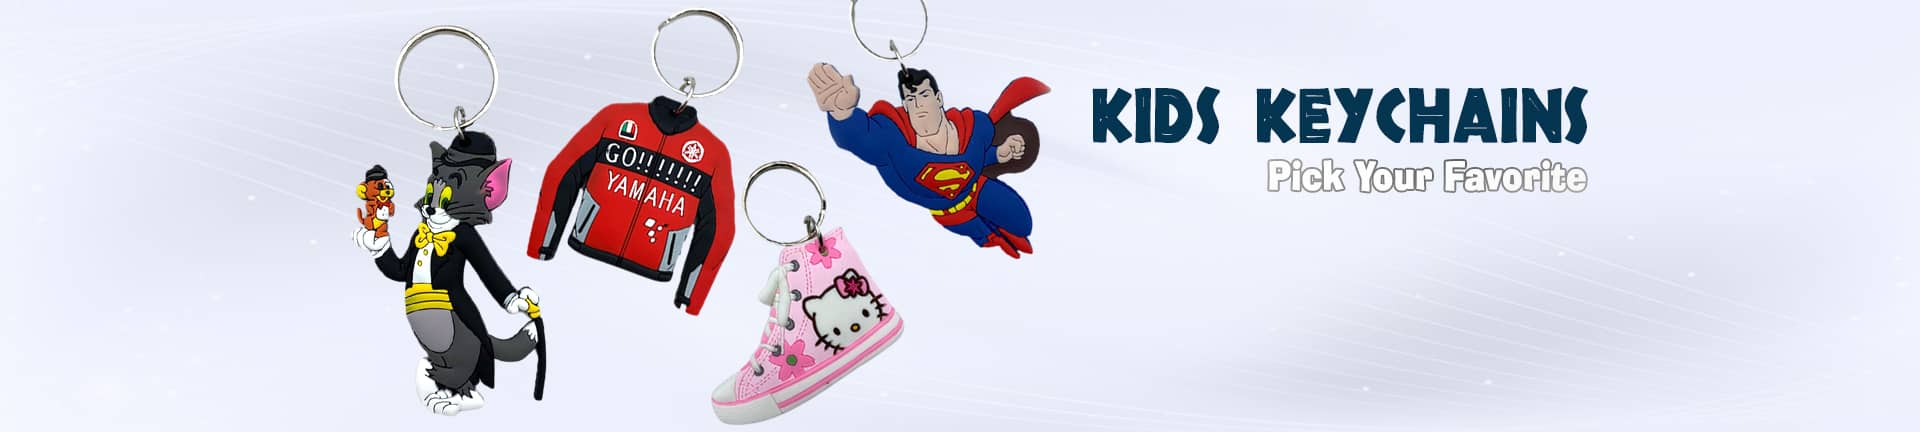 Best Online Key Chains For Kids With Price in Pakistan - Kayazar